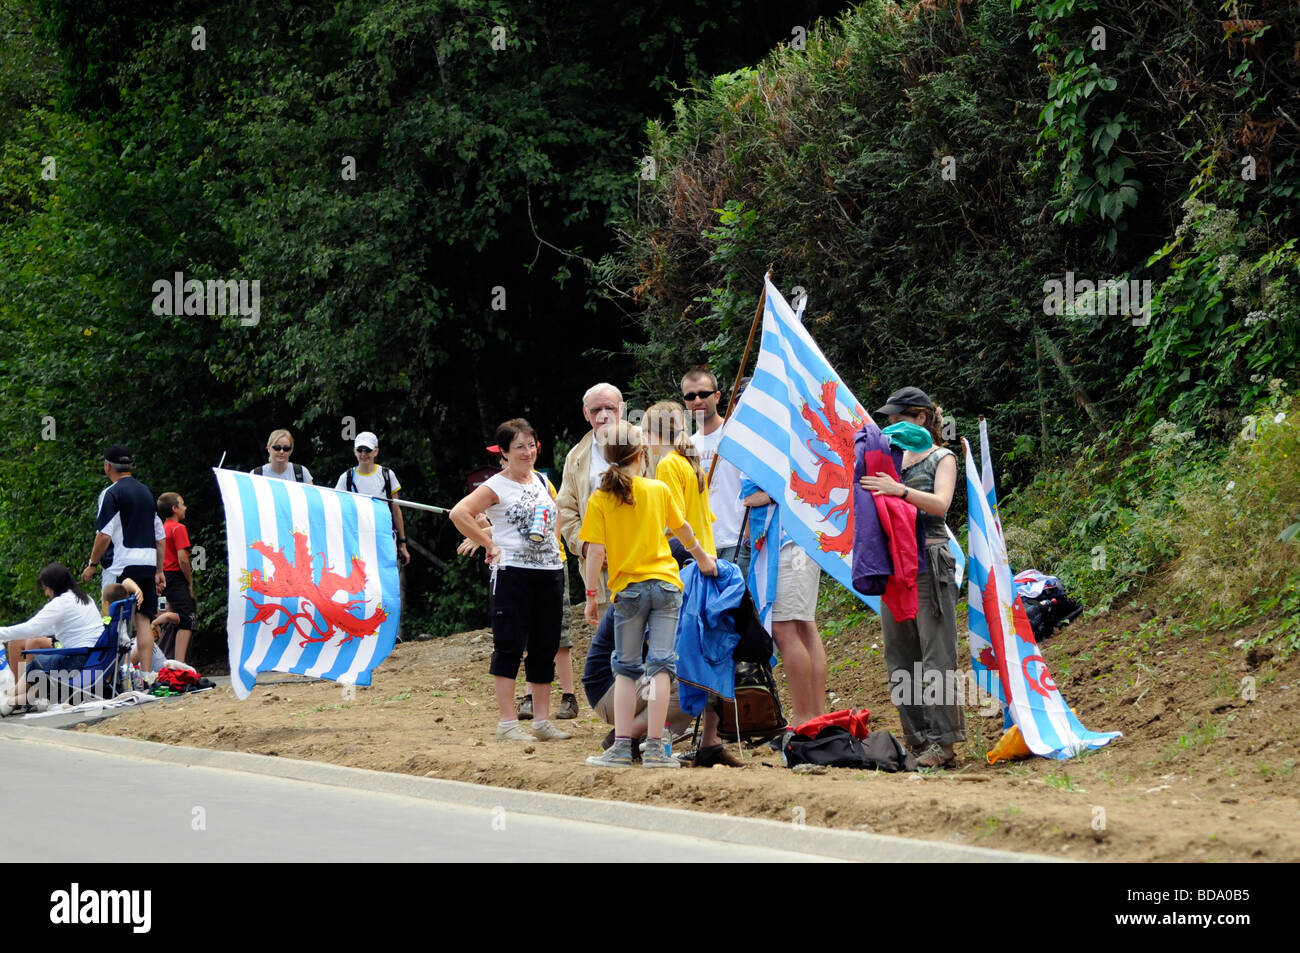 Andy Schleck supporters, carrying Luxembourg flags. Tour de France 2009 Lac Annecy Time Trial Stock Photo